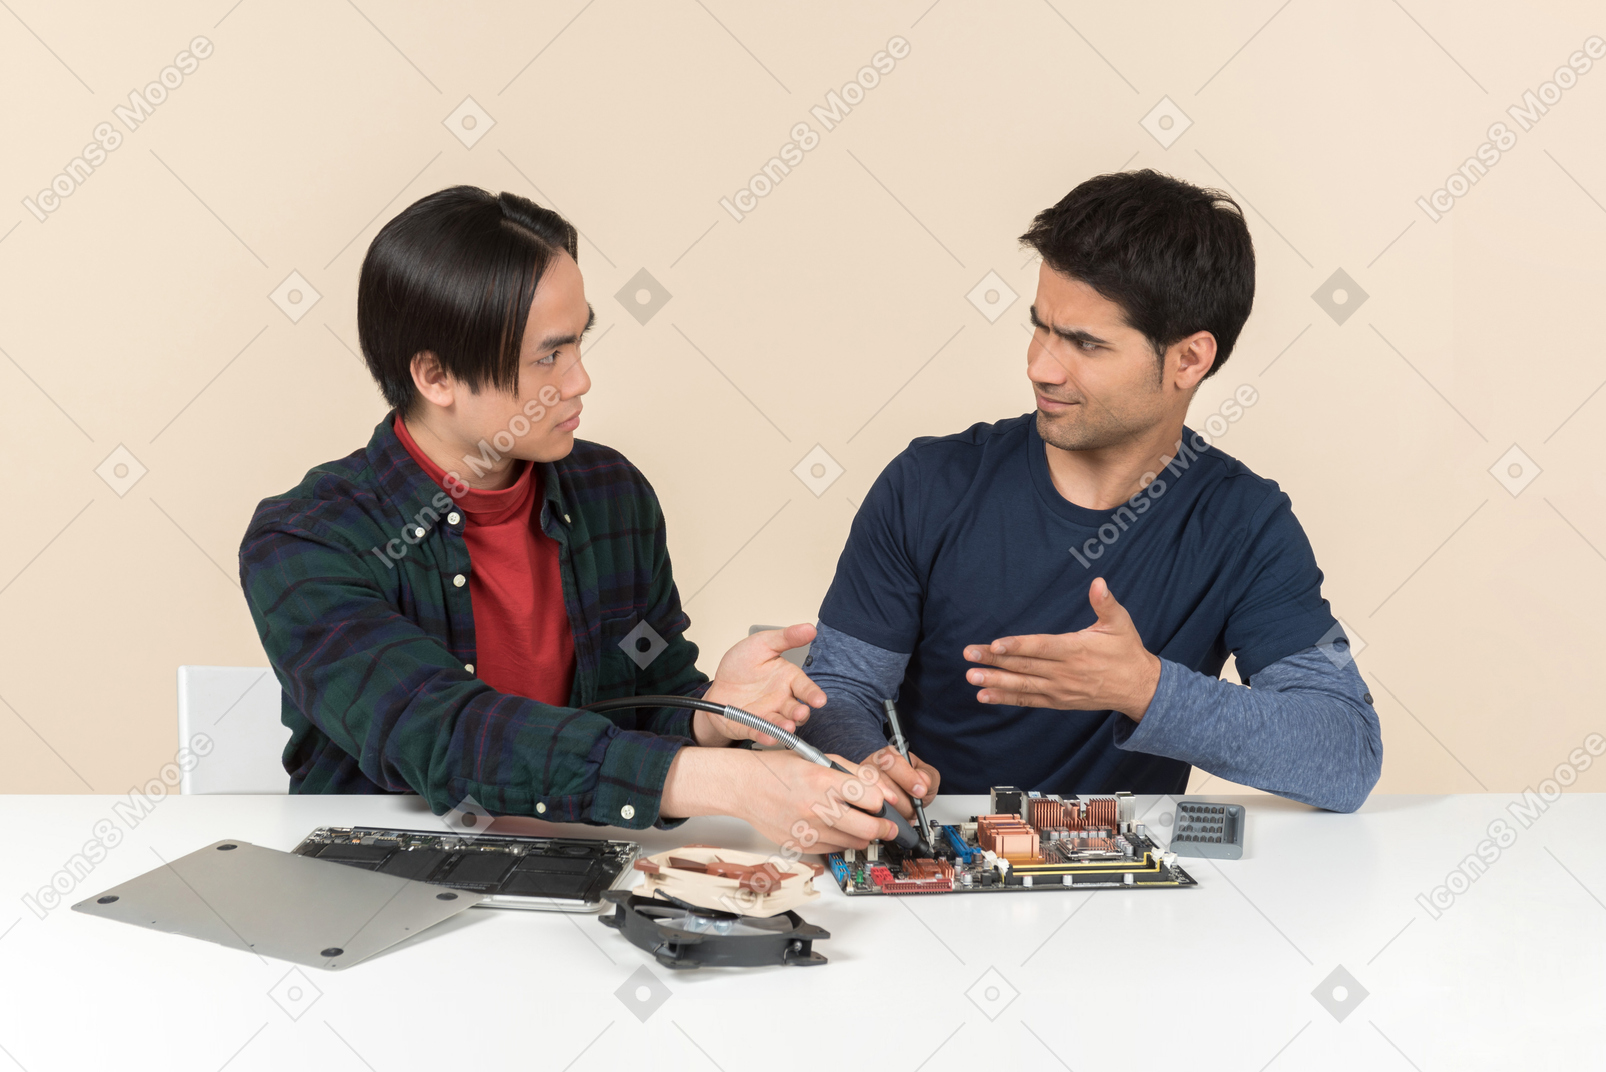 Two young geeks with some details on the table having some issues